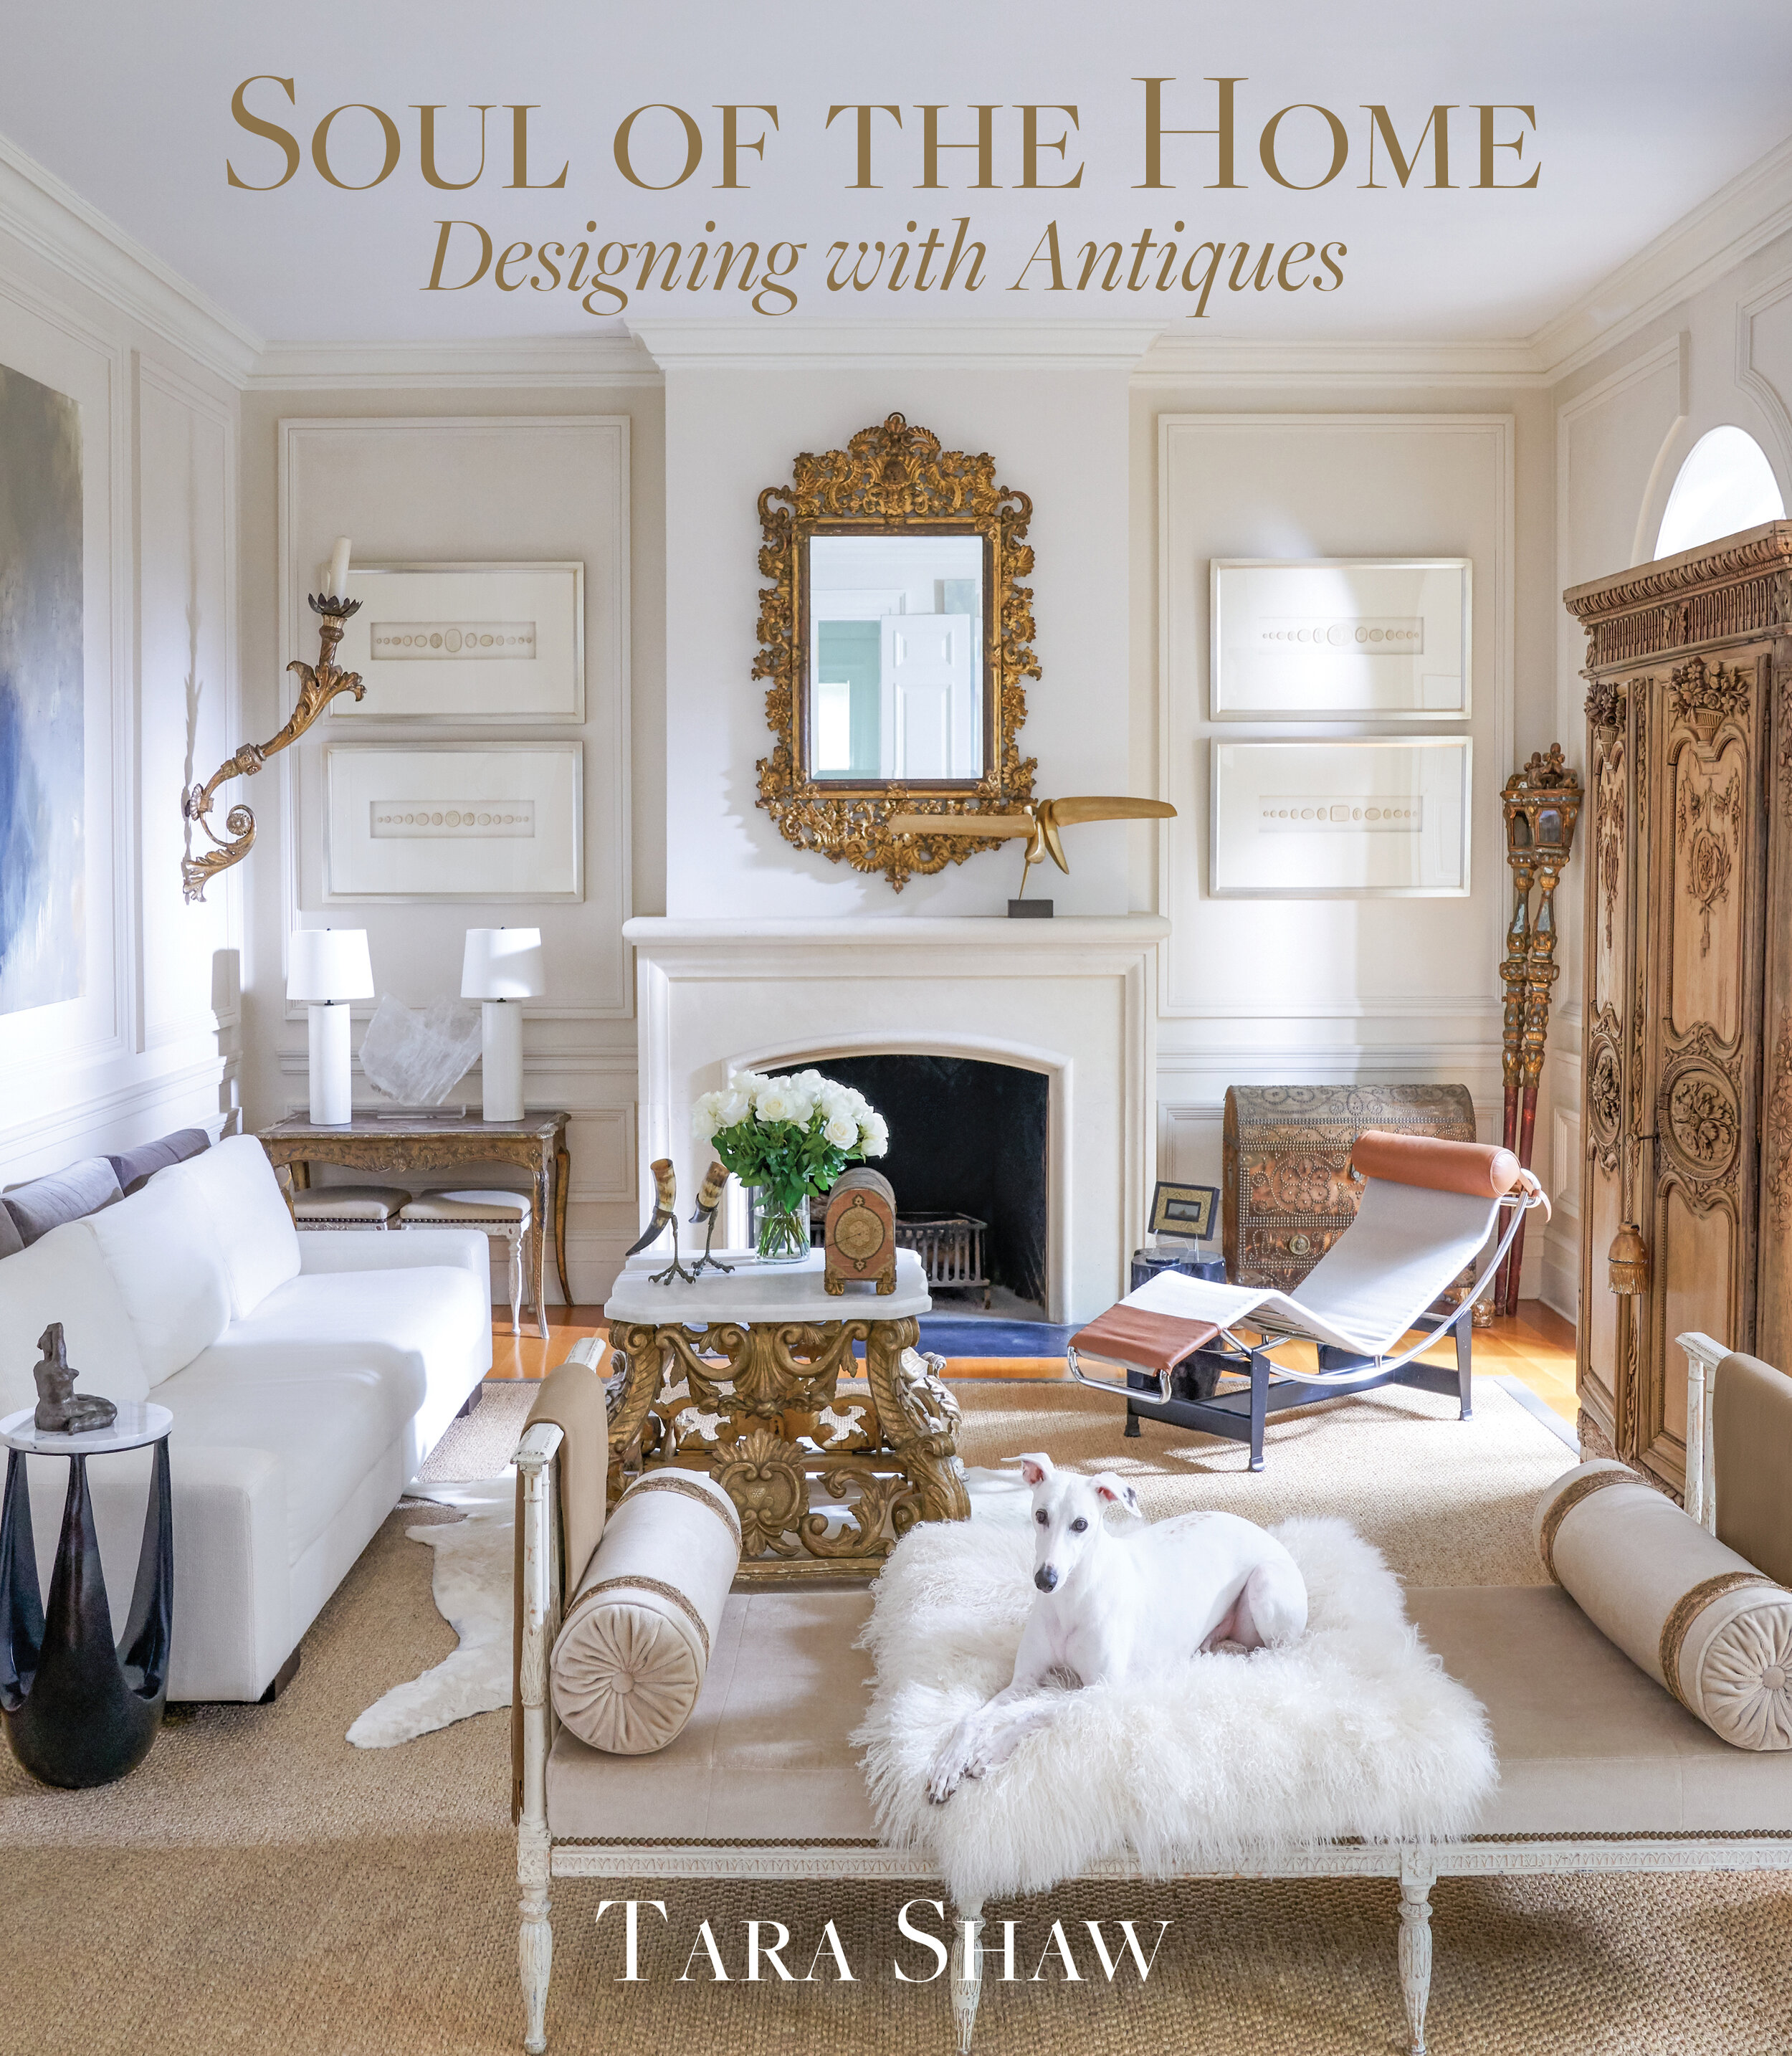 Designer and antiques dealer Tara Shaw is a respected supplier of French and European antiques for a host of AD100 and Elle Decor A-listers, including Bobby McAlpine, Mary McDonald, and Bunny Williams. In her first book, she helps readers understand…